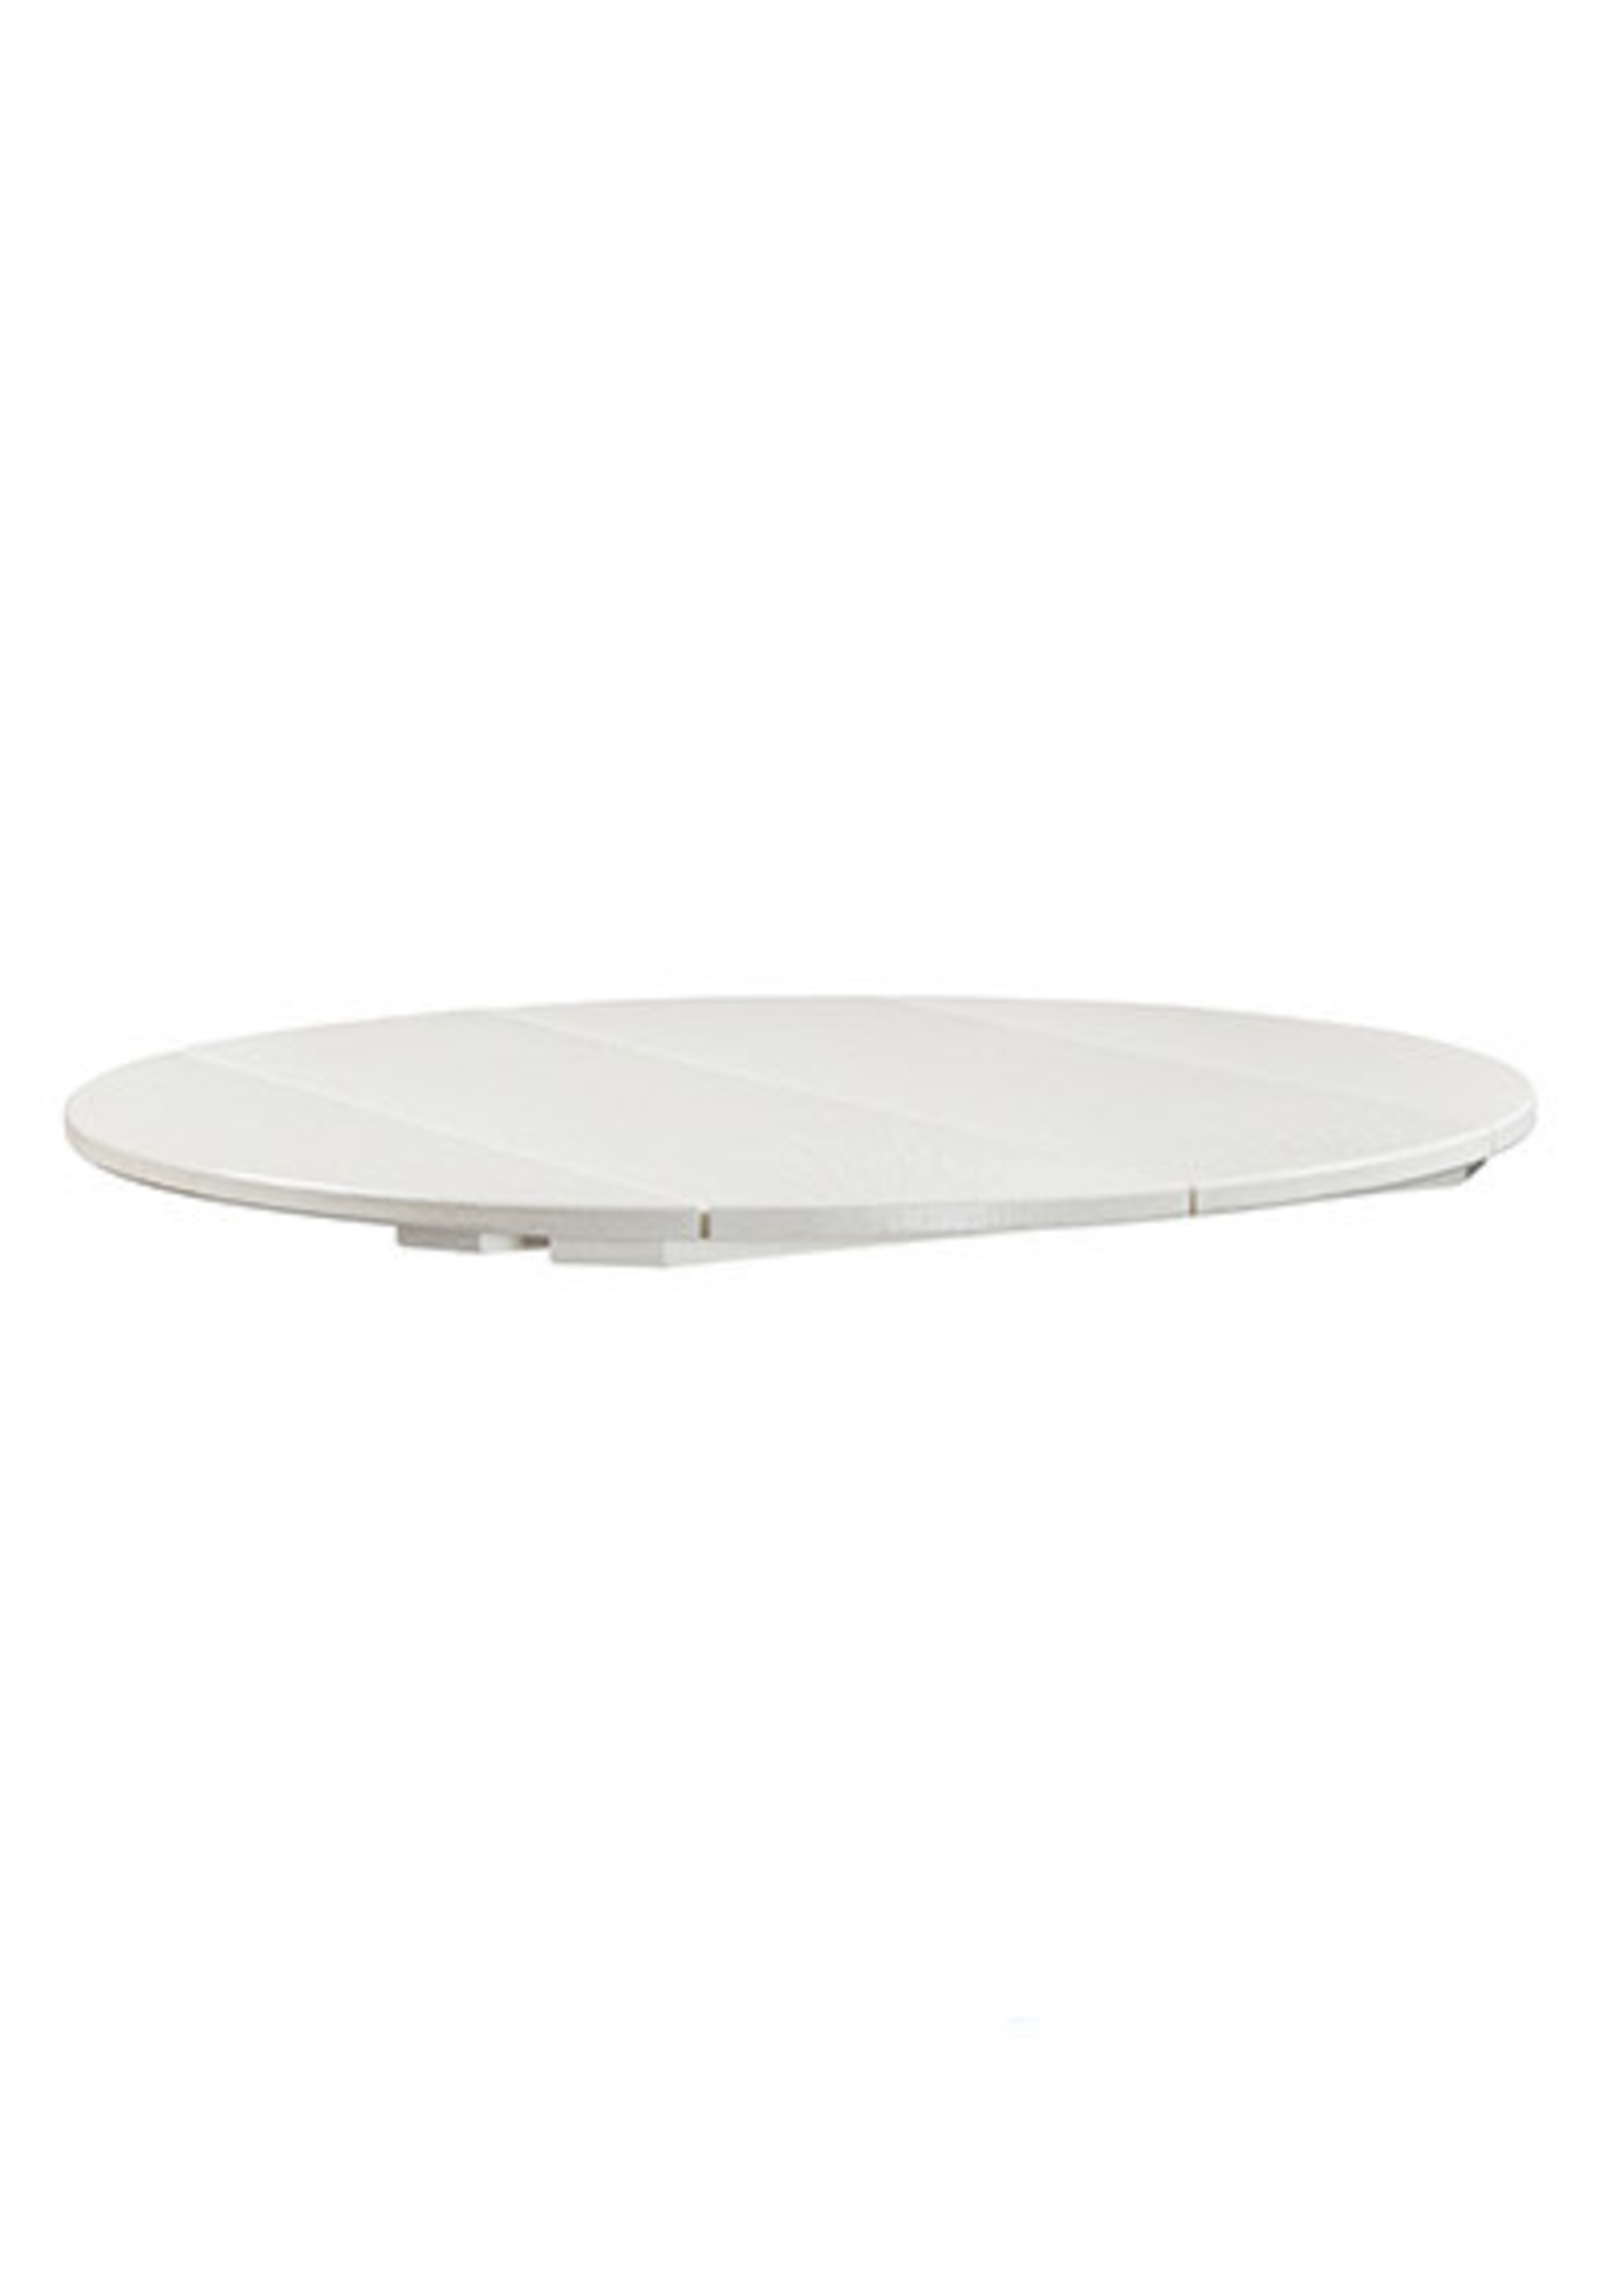 C.R. Plastic Products 181.TT04 * 40" Round Table Top